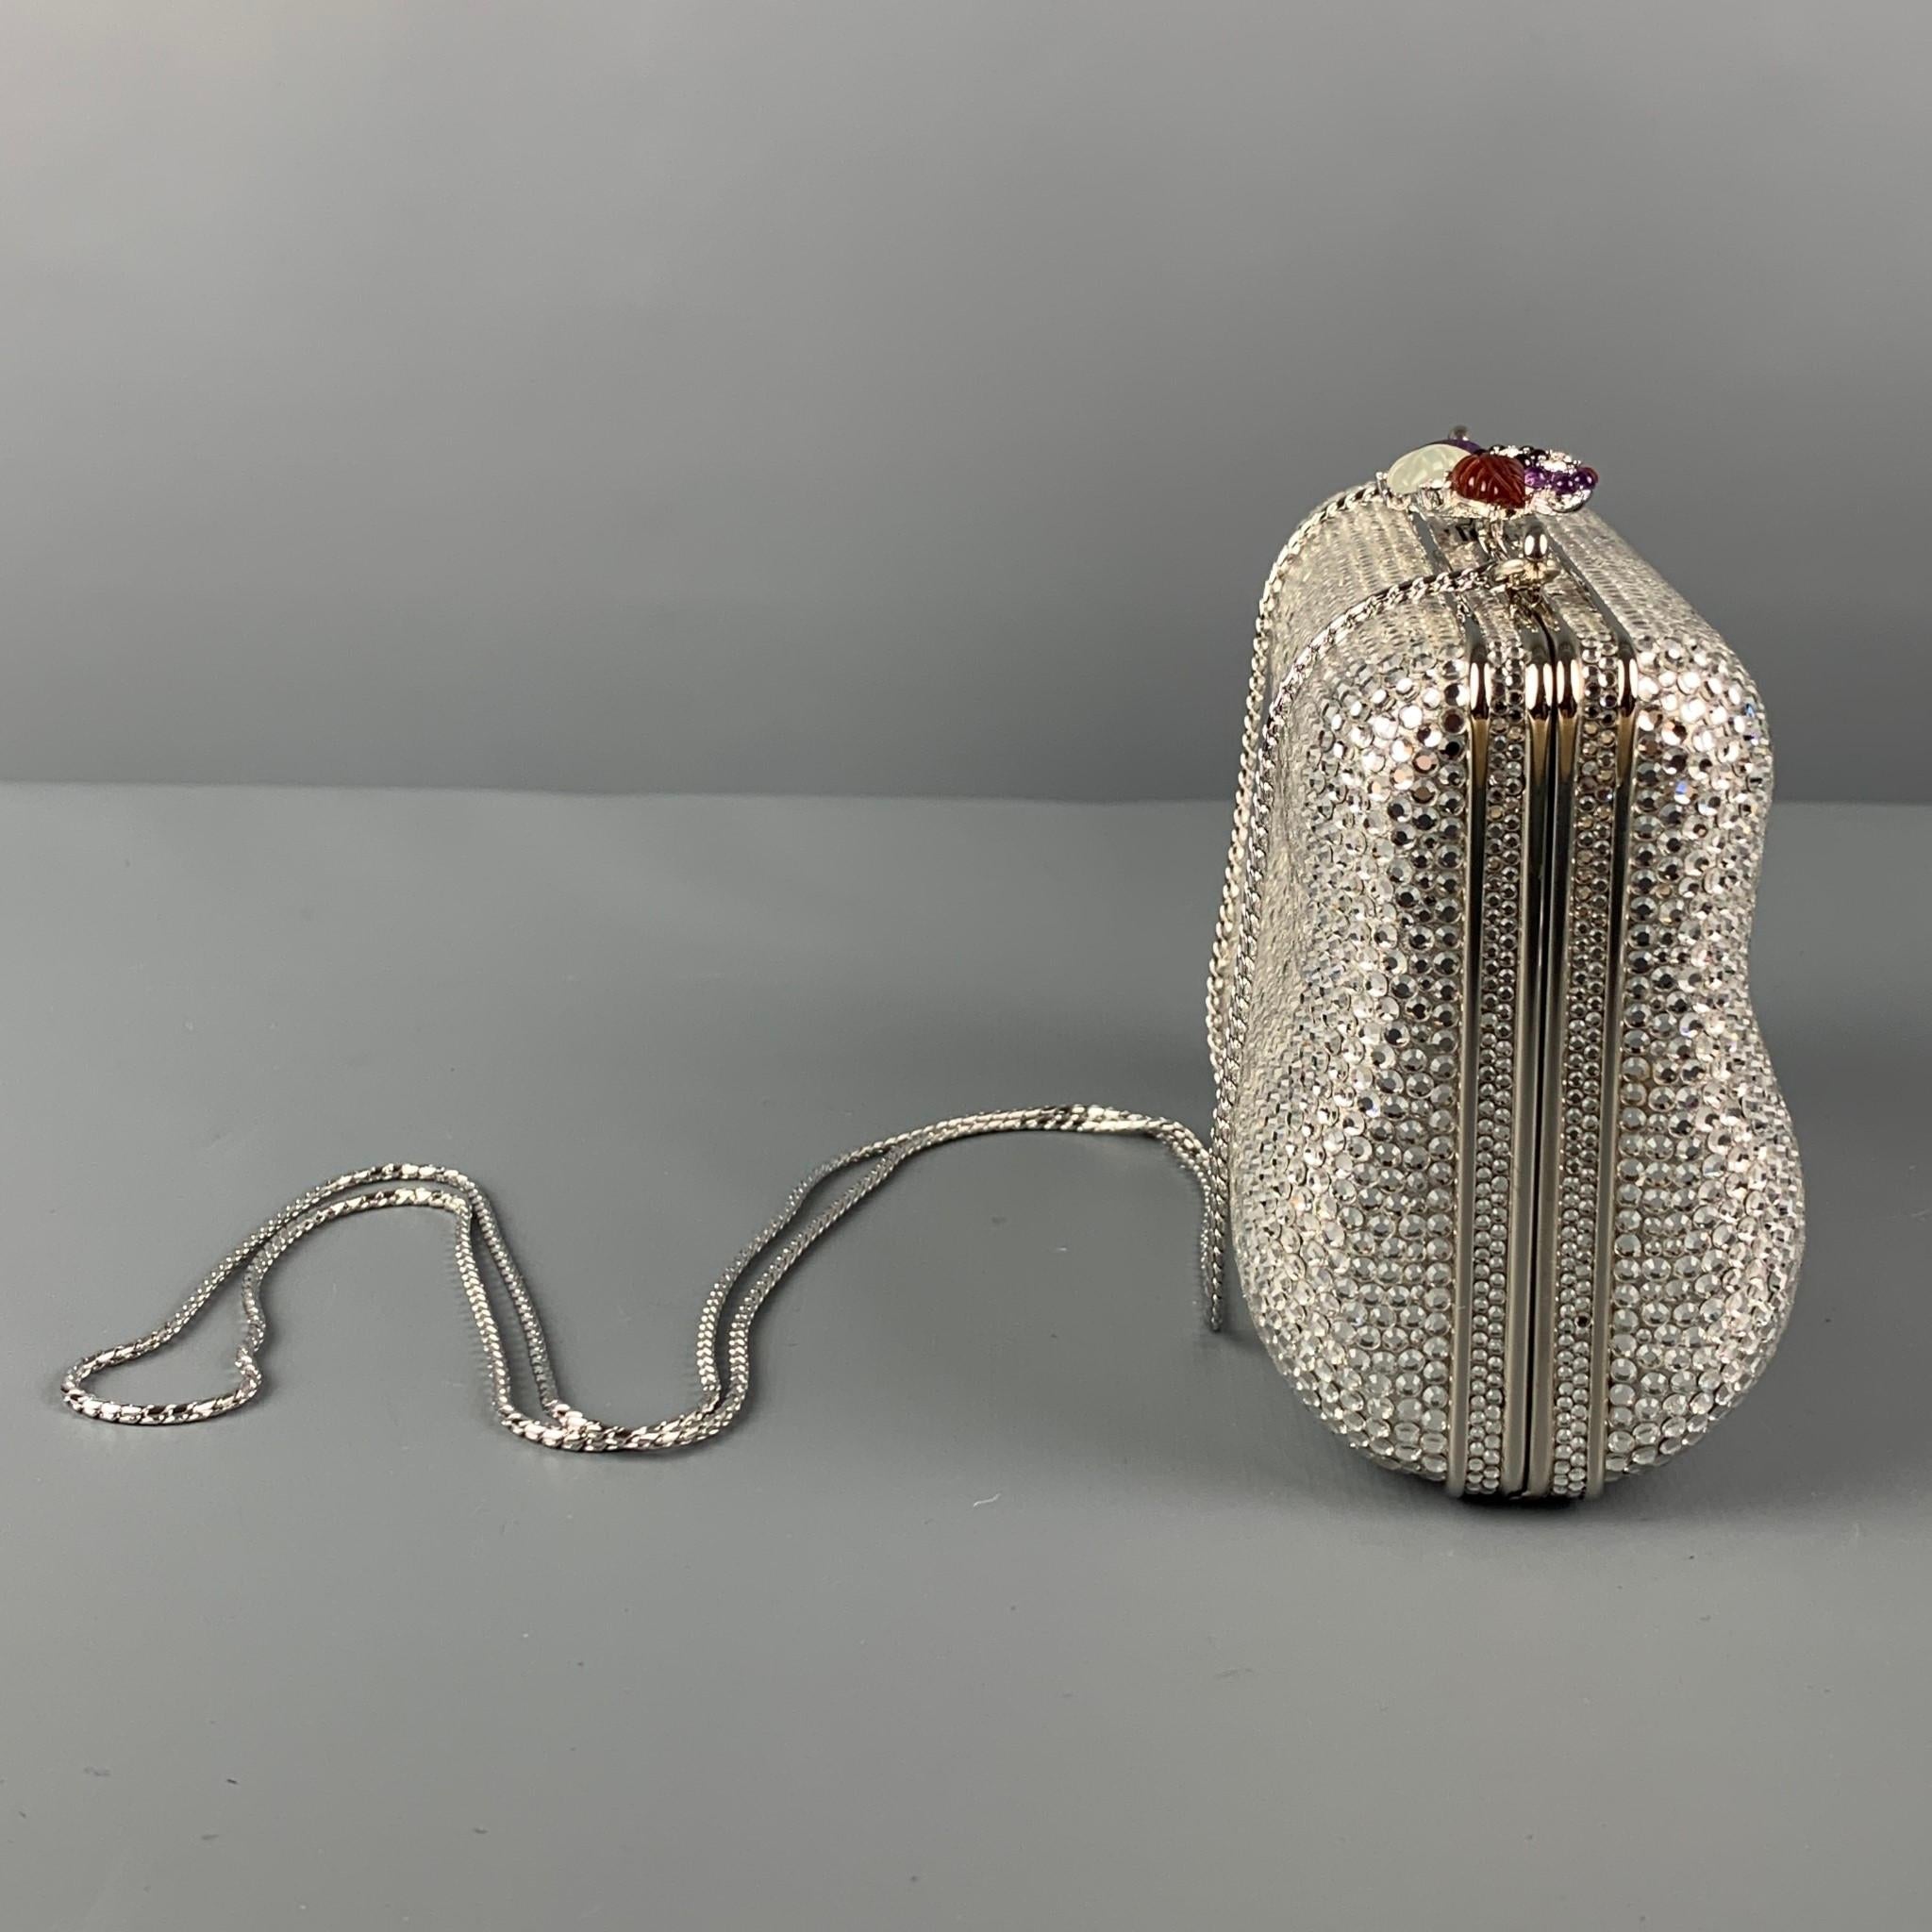 Vintage JUDITH LEIBER clutch comes in a silver rhinestones, chain link strap, and a floral clasp closure. Includes mini coin bag, mirror, and comb. Comes with box.

Very Good Pre-Owned Condition.

Measurements:

Length: 5.5 in.
Width: 2 in.
Height: